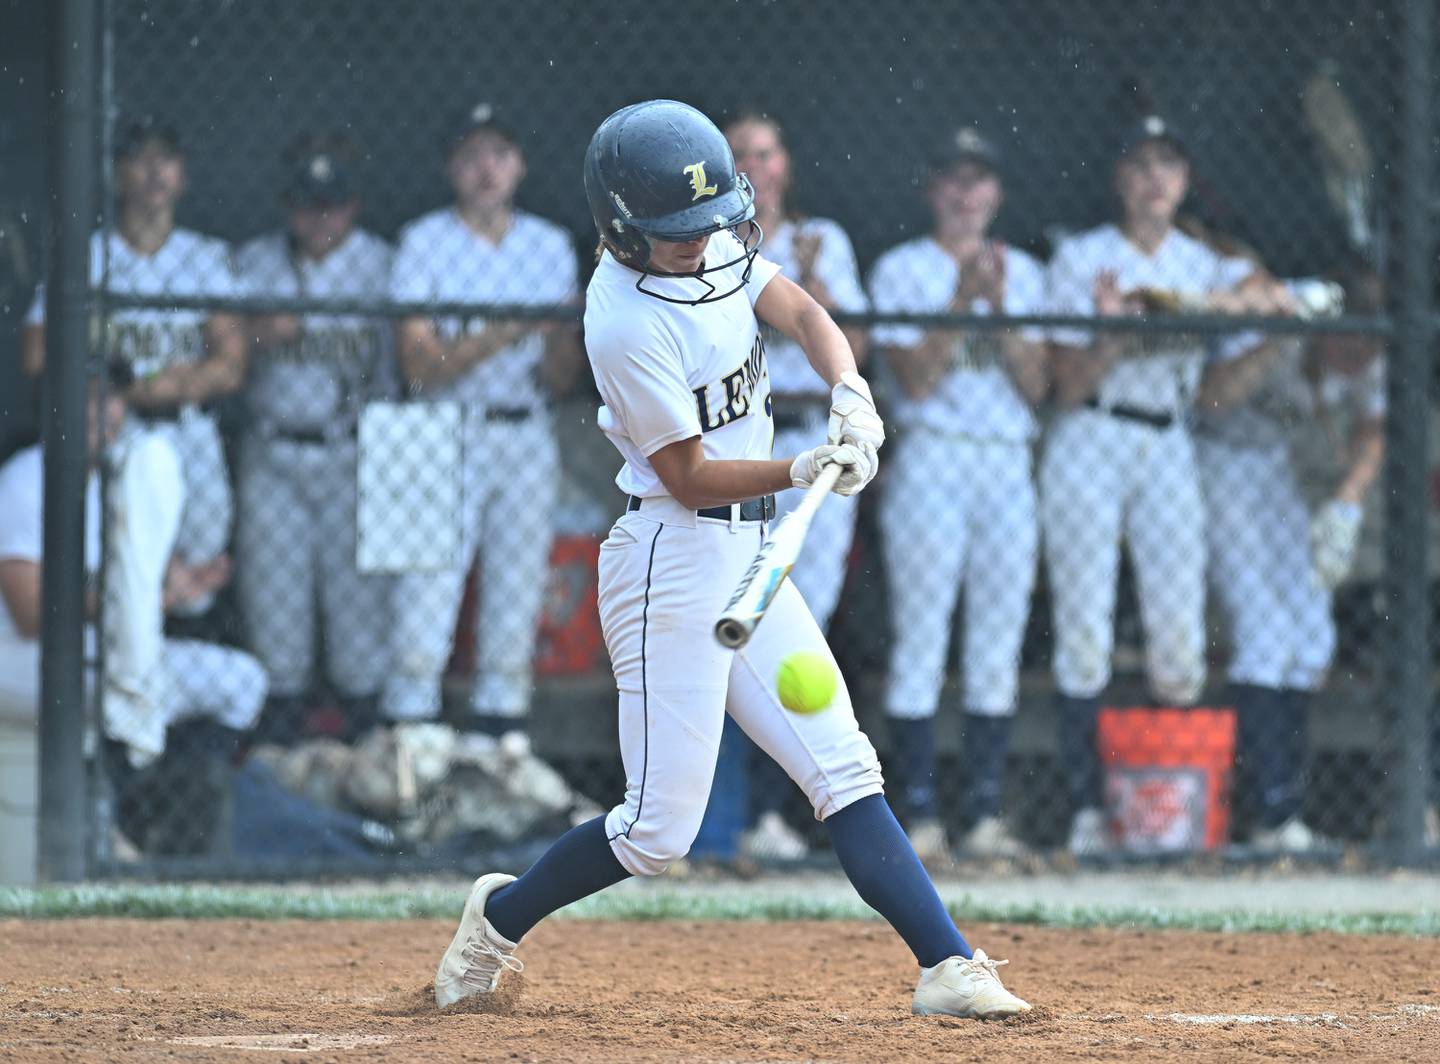 Lemont's Francesca Rita swings at a pitch during the Lemont Class 3A sectional semifinal game against Joliet Catholic on Wednesday, May. 31, 2023, at Lemont.